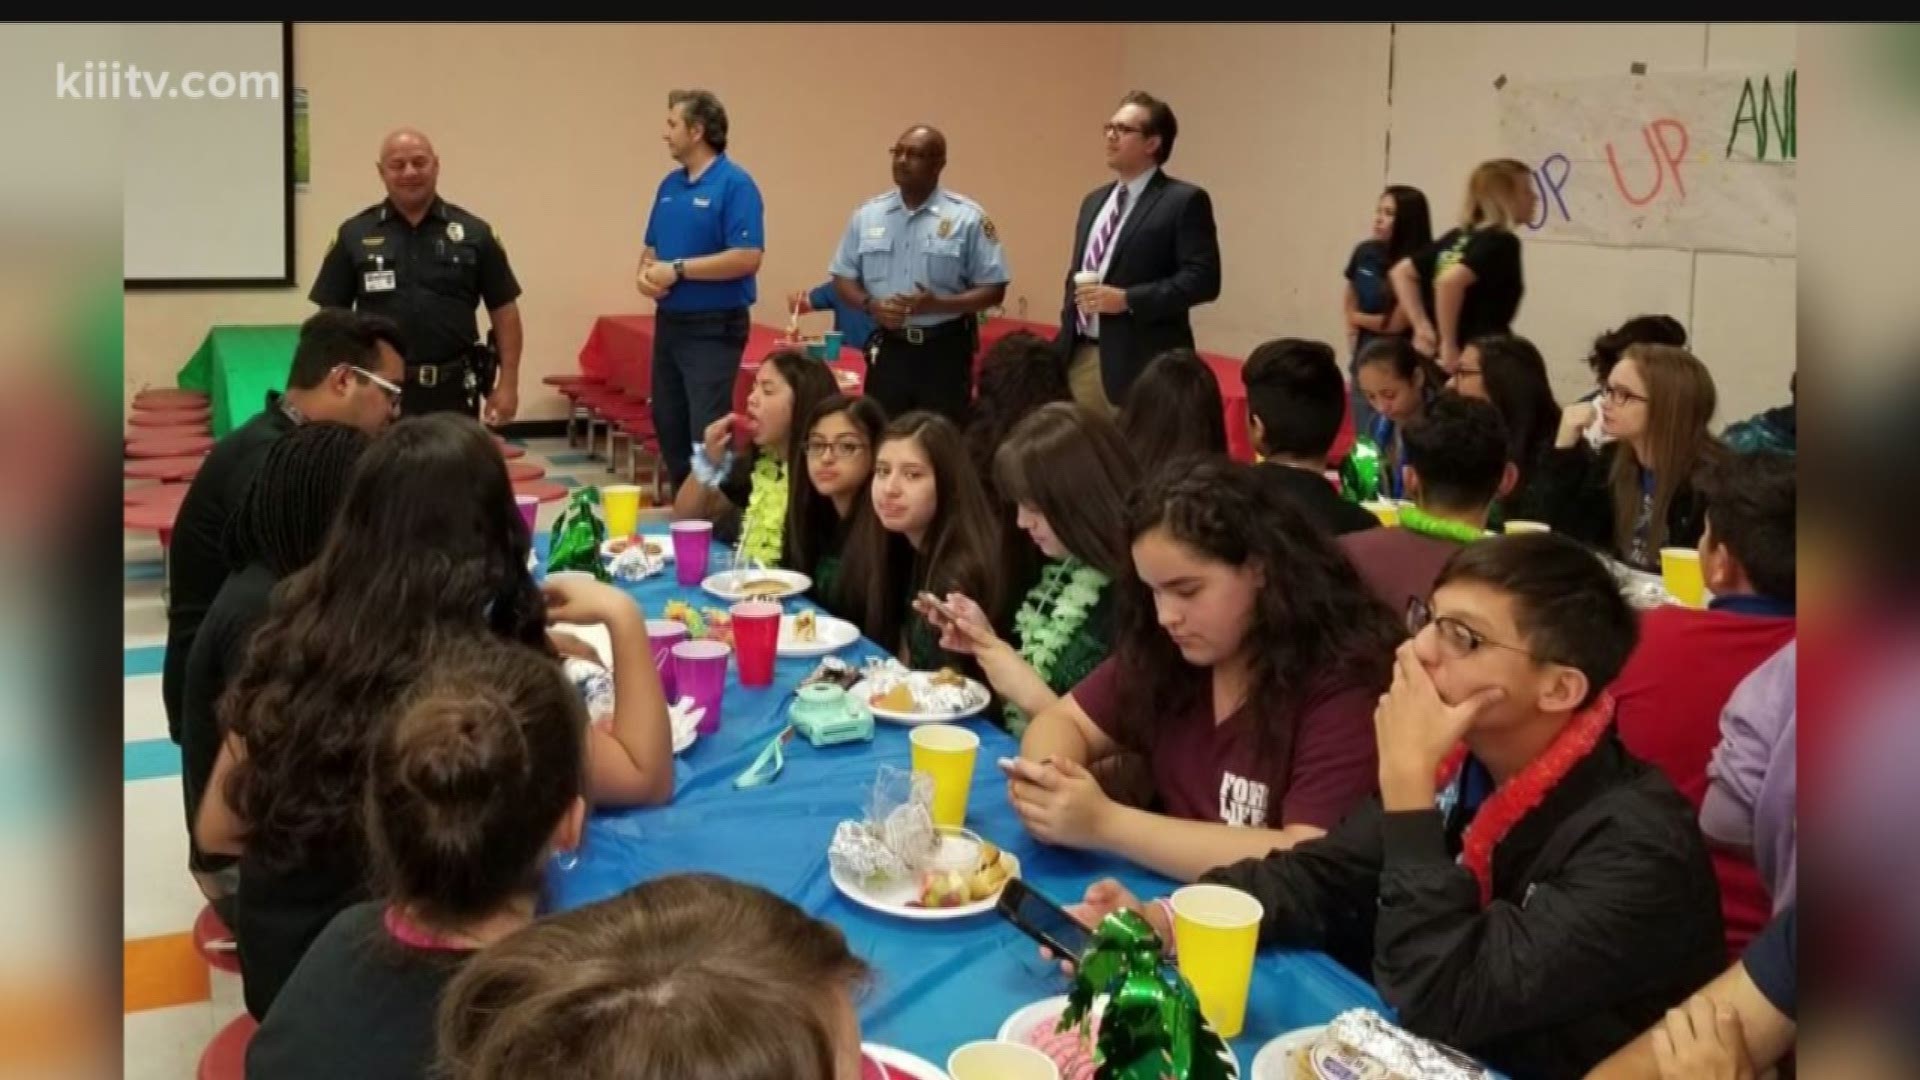 The graduating eighth grade class at the School of Science & Technology in Corpus Christi had a special breakfast.